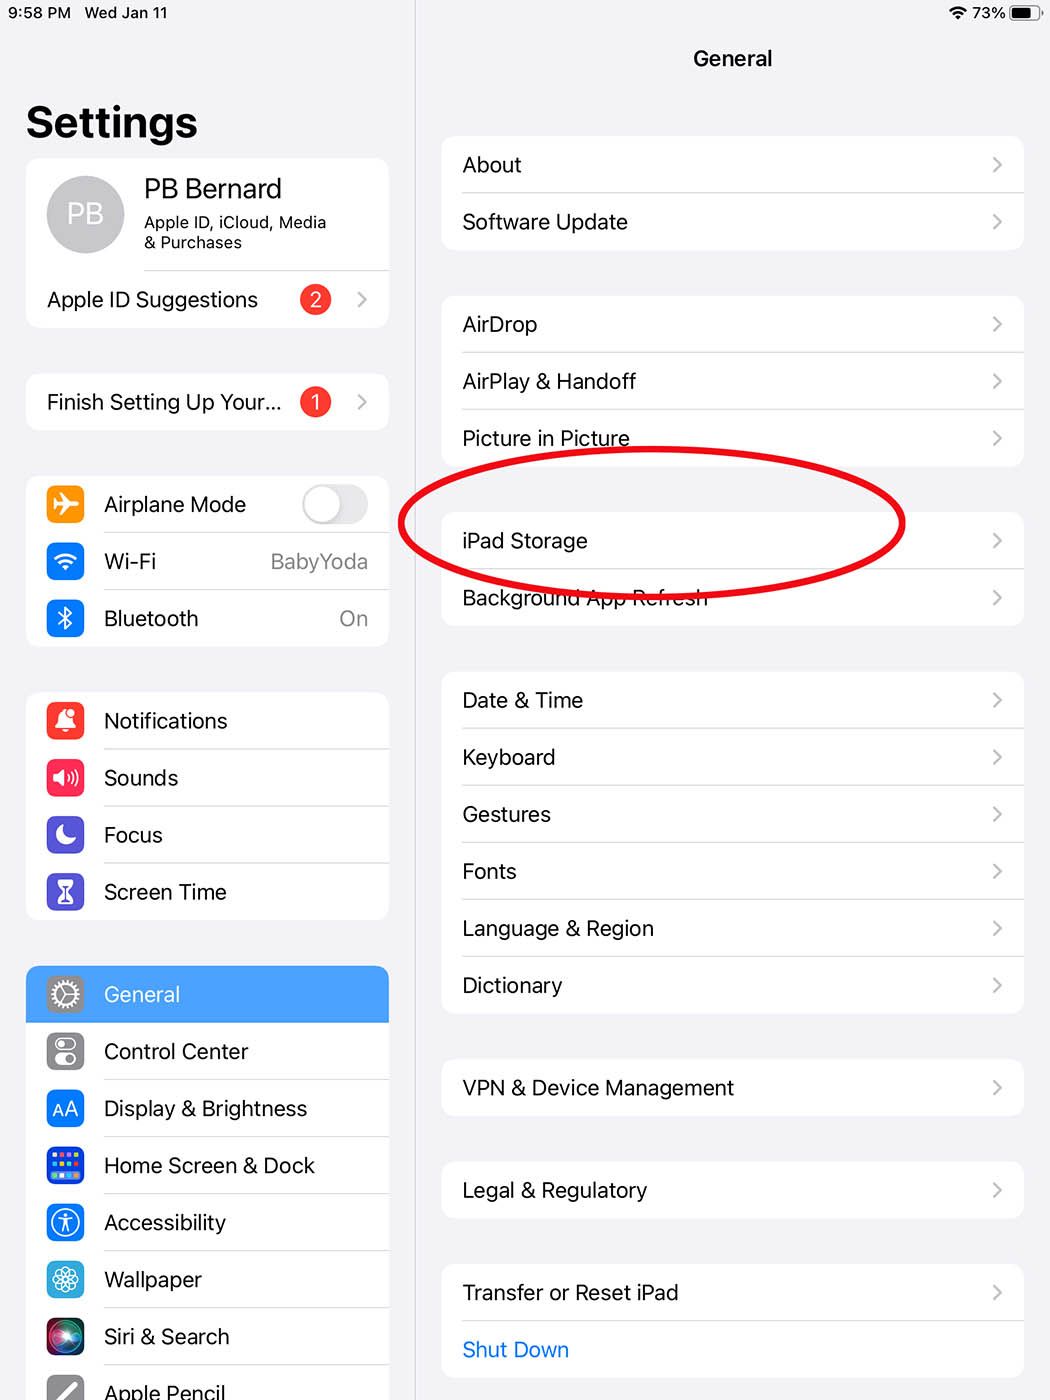 How to free up space on your iPad